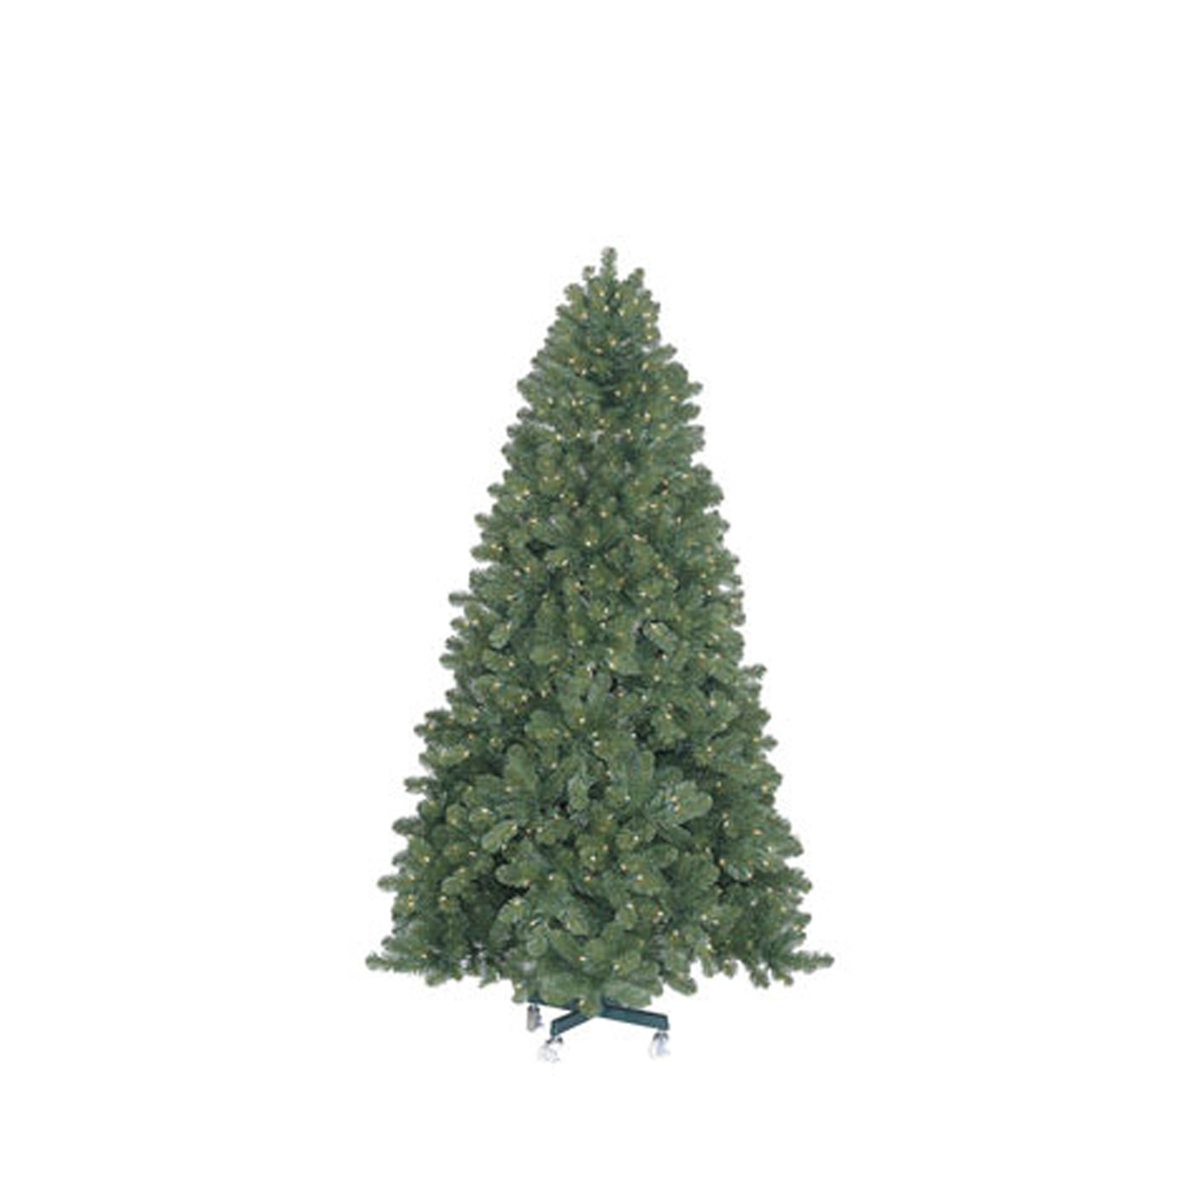 Olympia Fir Tree - Warm White LED Lights - Rolling Stand - 7.5ft Tall - Commercial Christmas Display